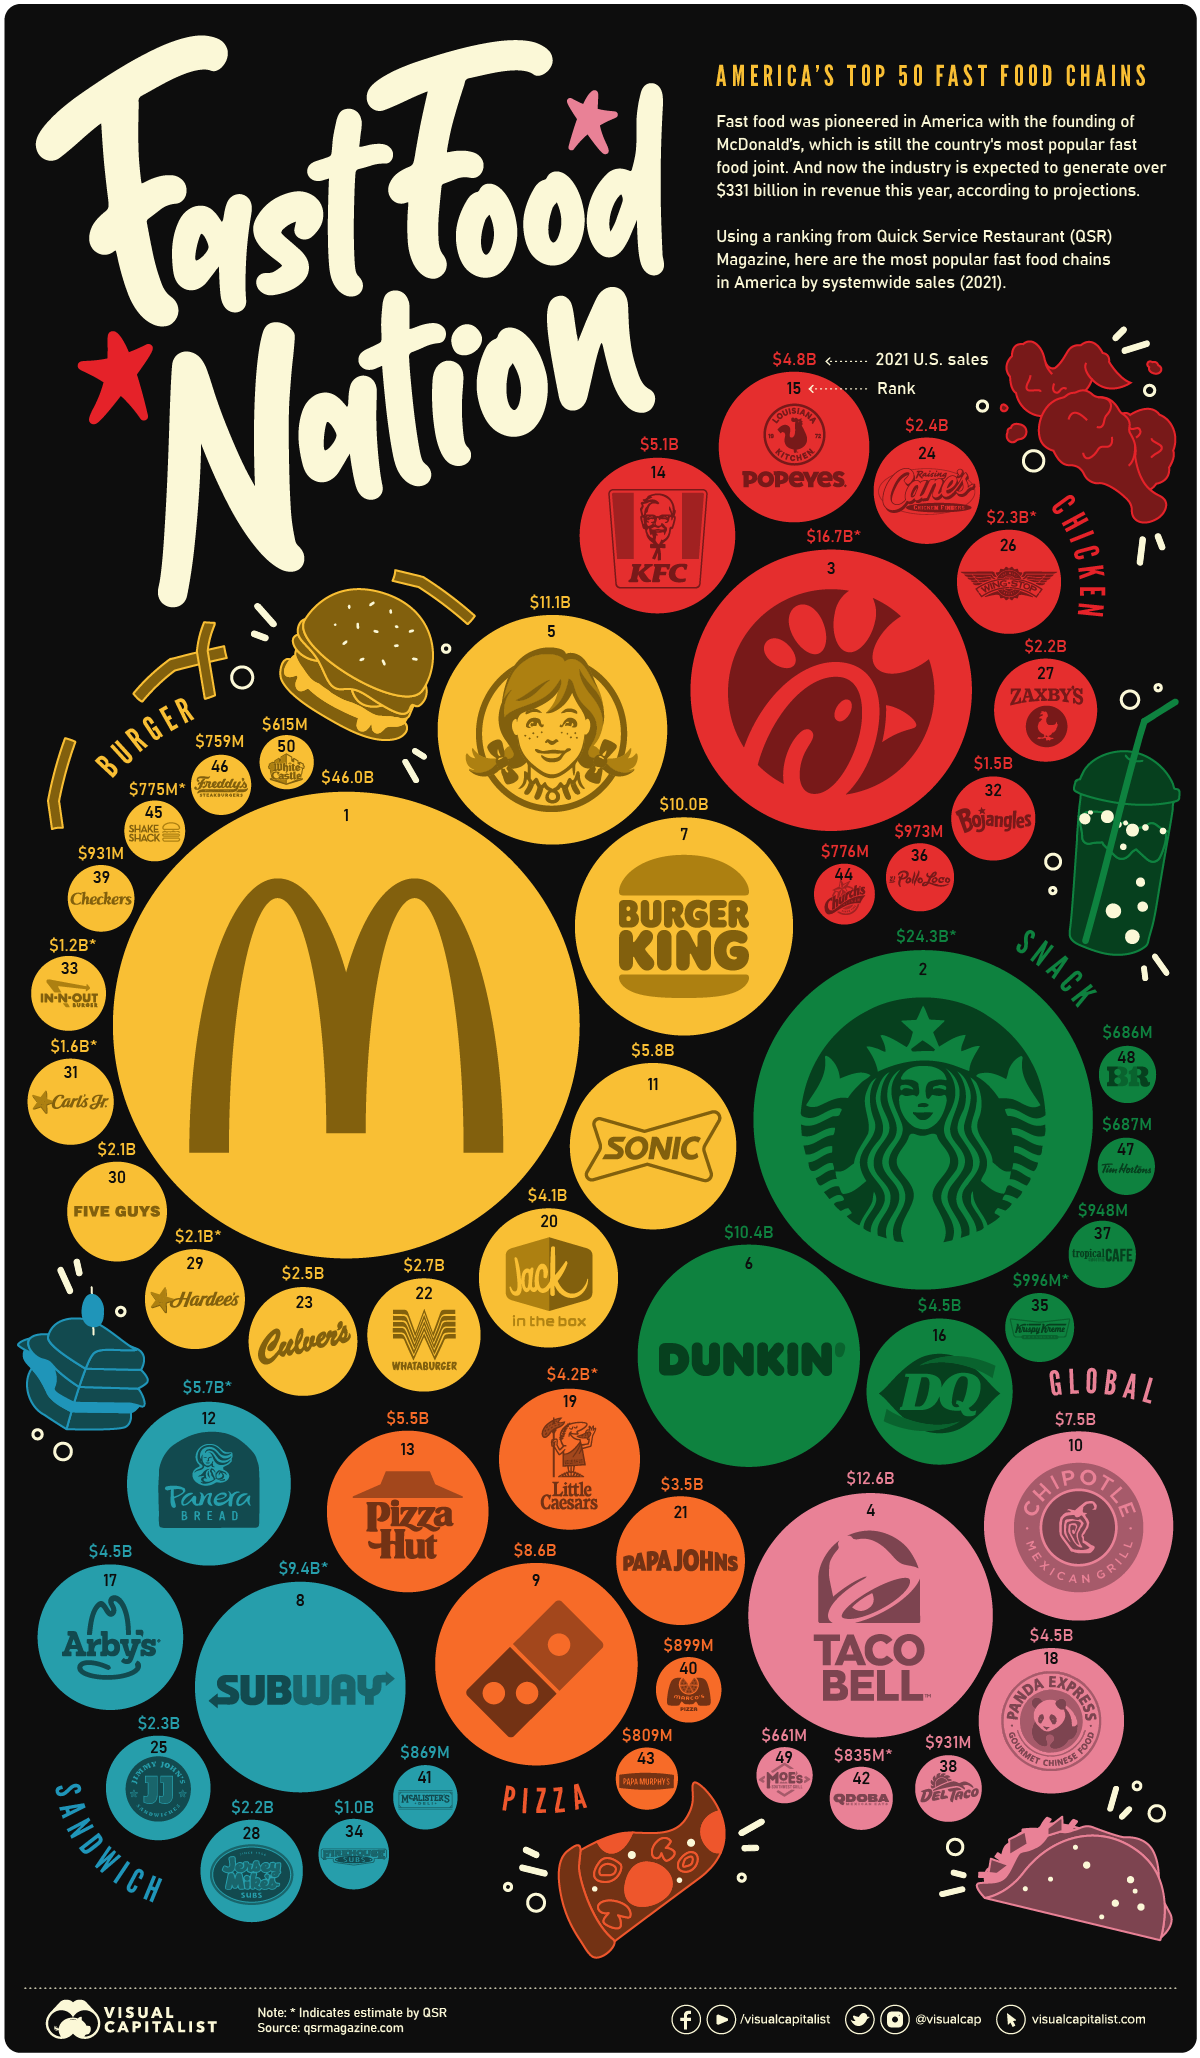 fast food brands ranked by systemwide sales in 2021